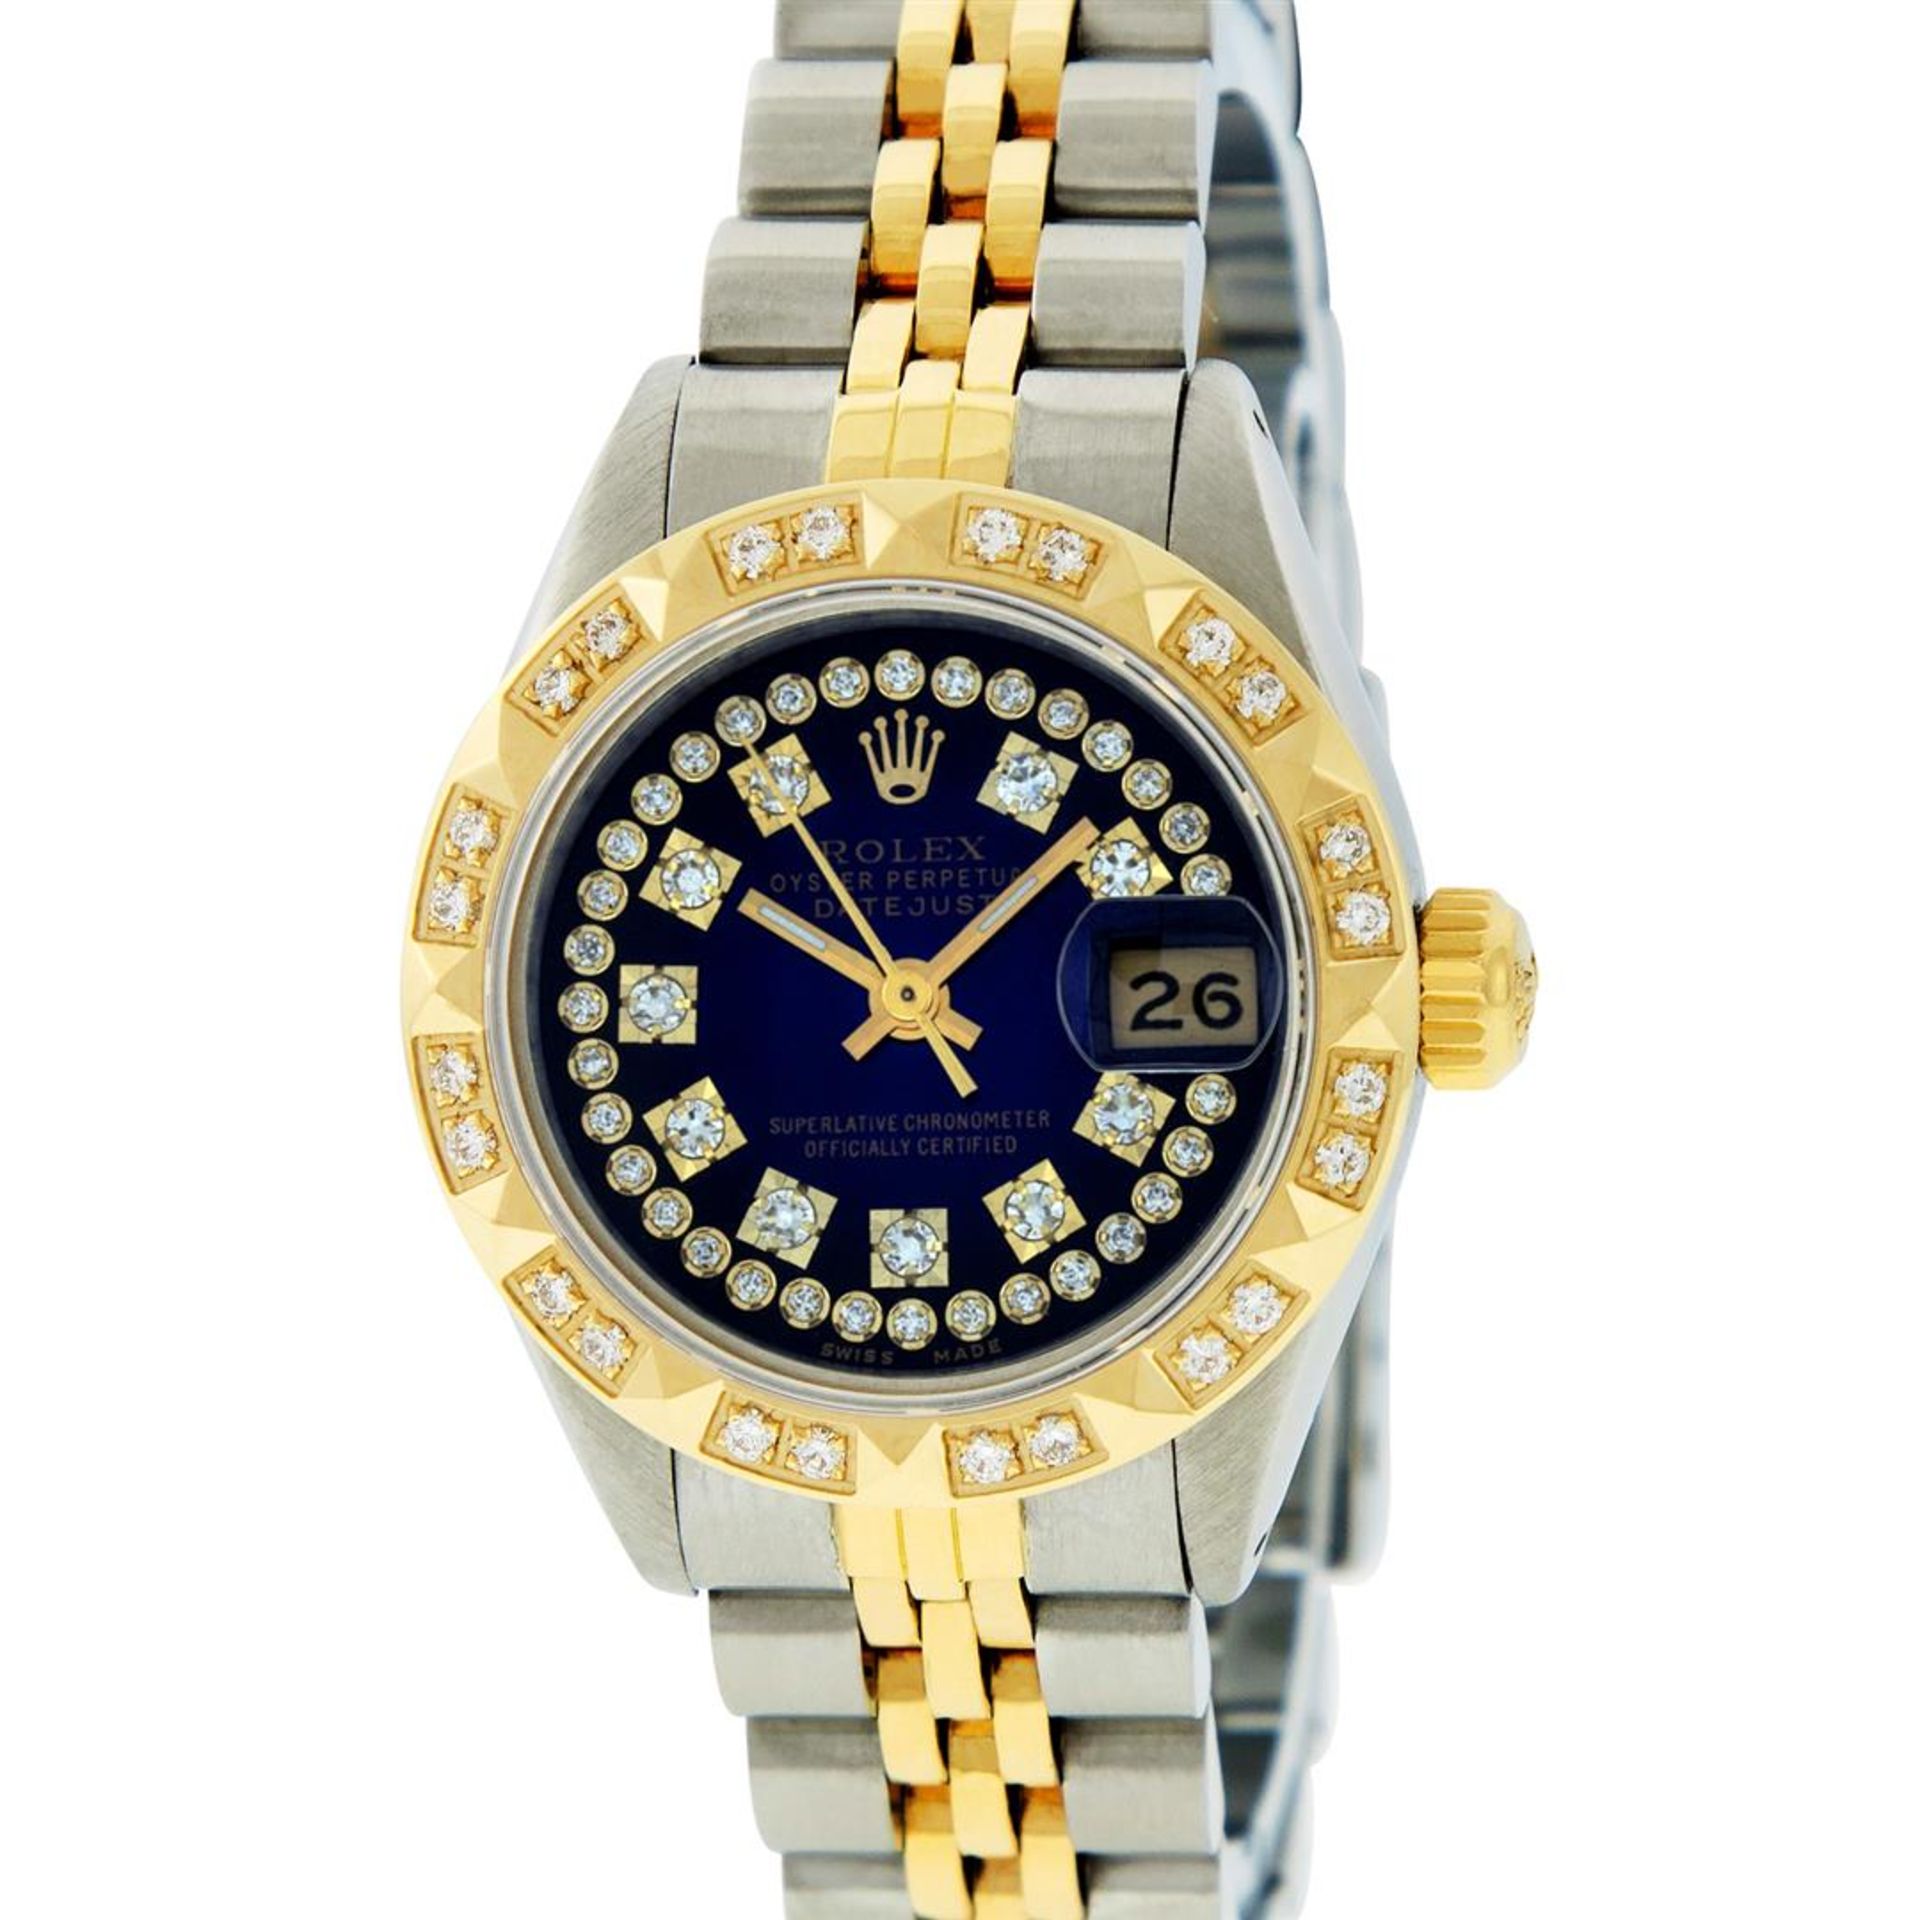 Rolex Ladies 2T YG/SS Blue Vignette String Pyramid Diamond Oyster Perpetual Date - Image 2 of 8